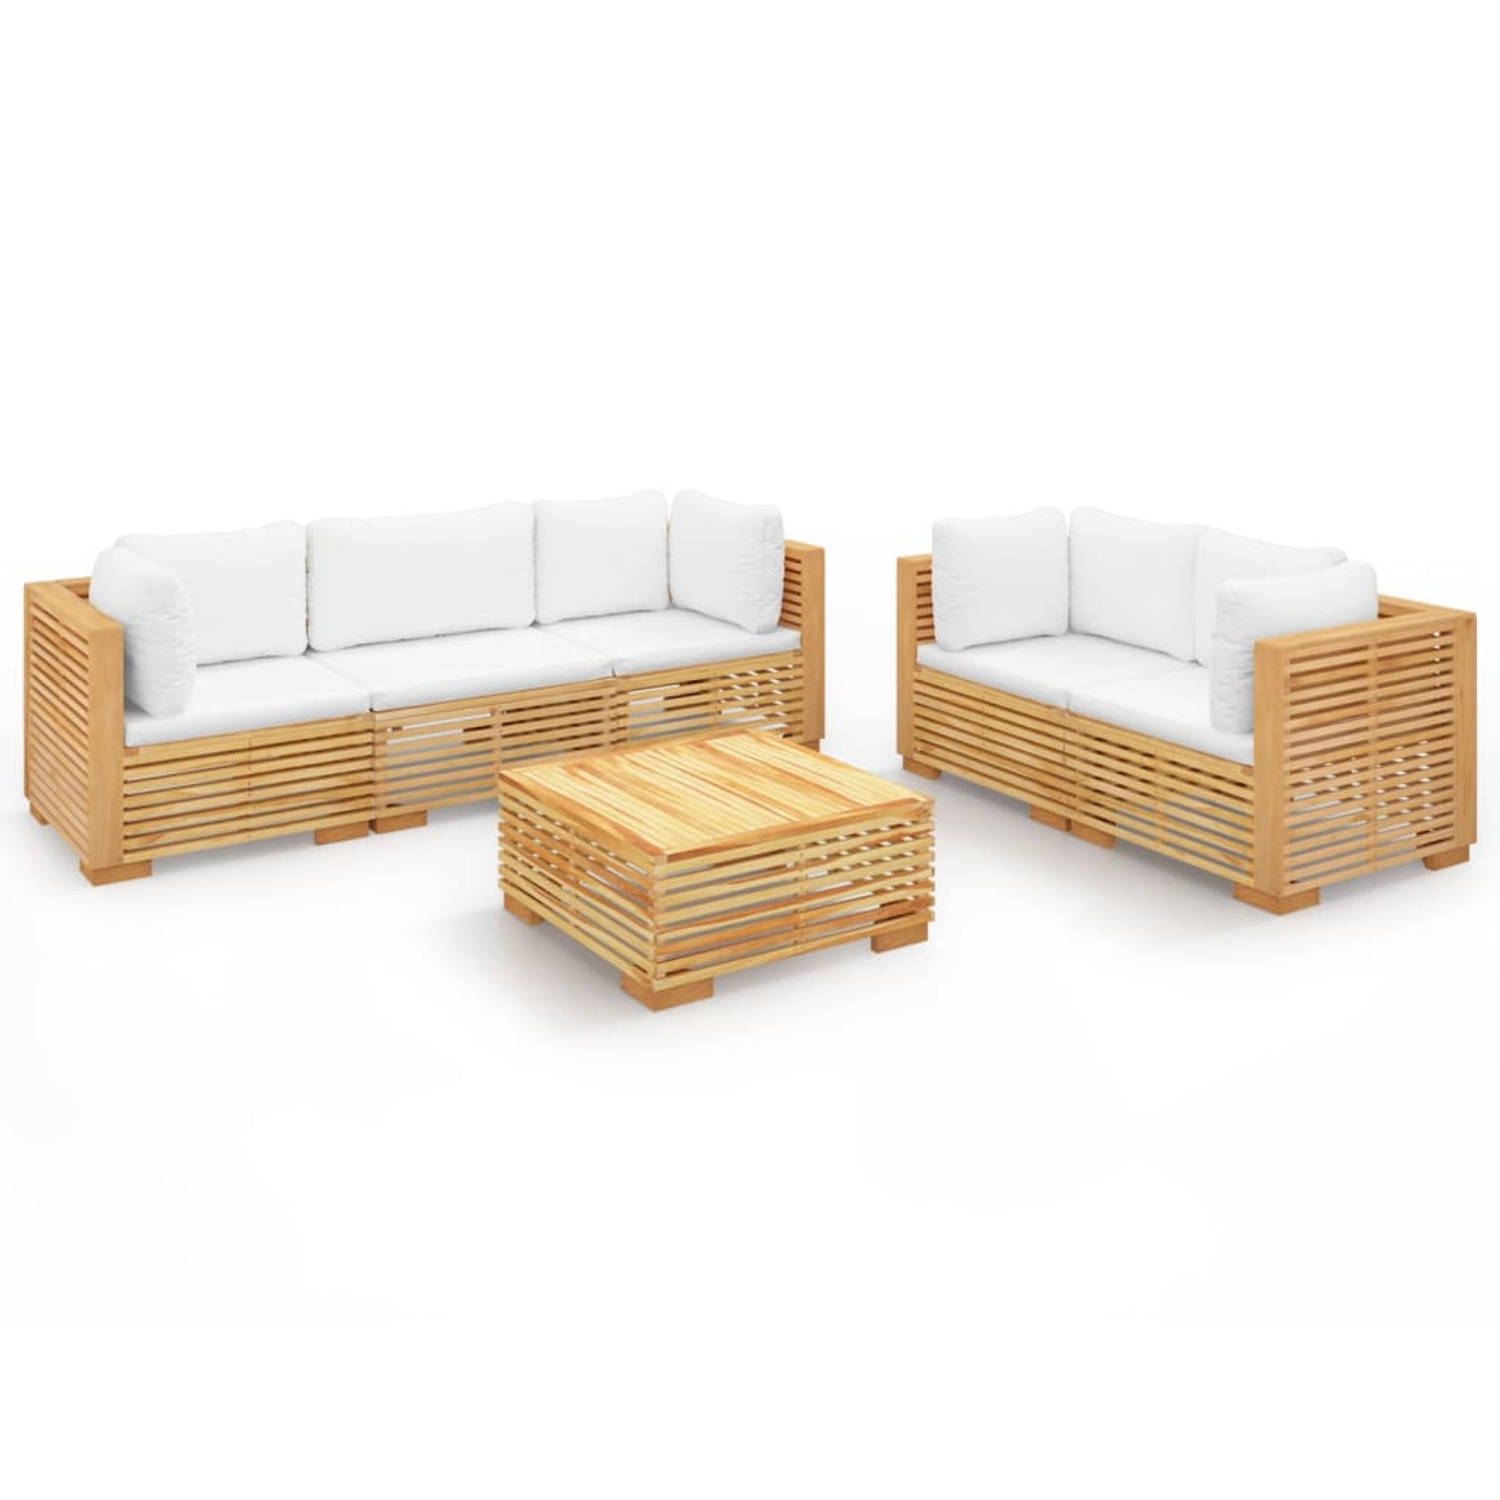 The Living Store Loungeset Teakhout - Tuinmeubelen - 69.5 x 69.5 x 60 cm - Crèmewit kussen - Inclusief kussens - The Living Store